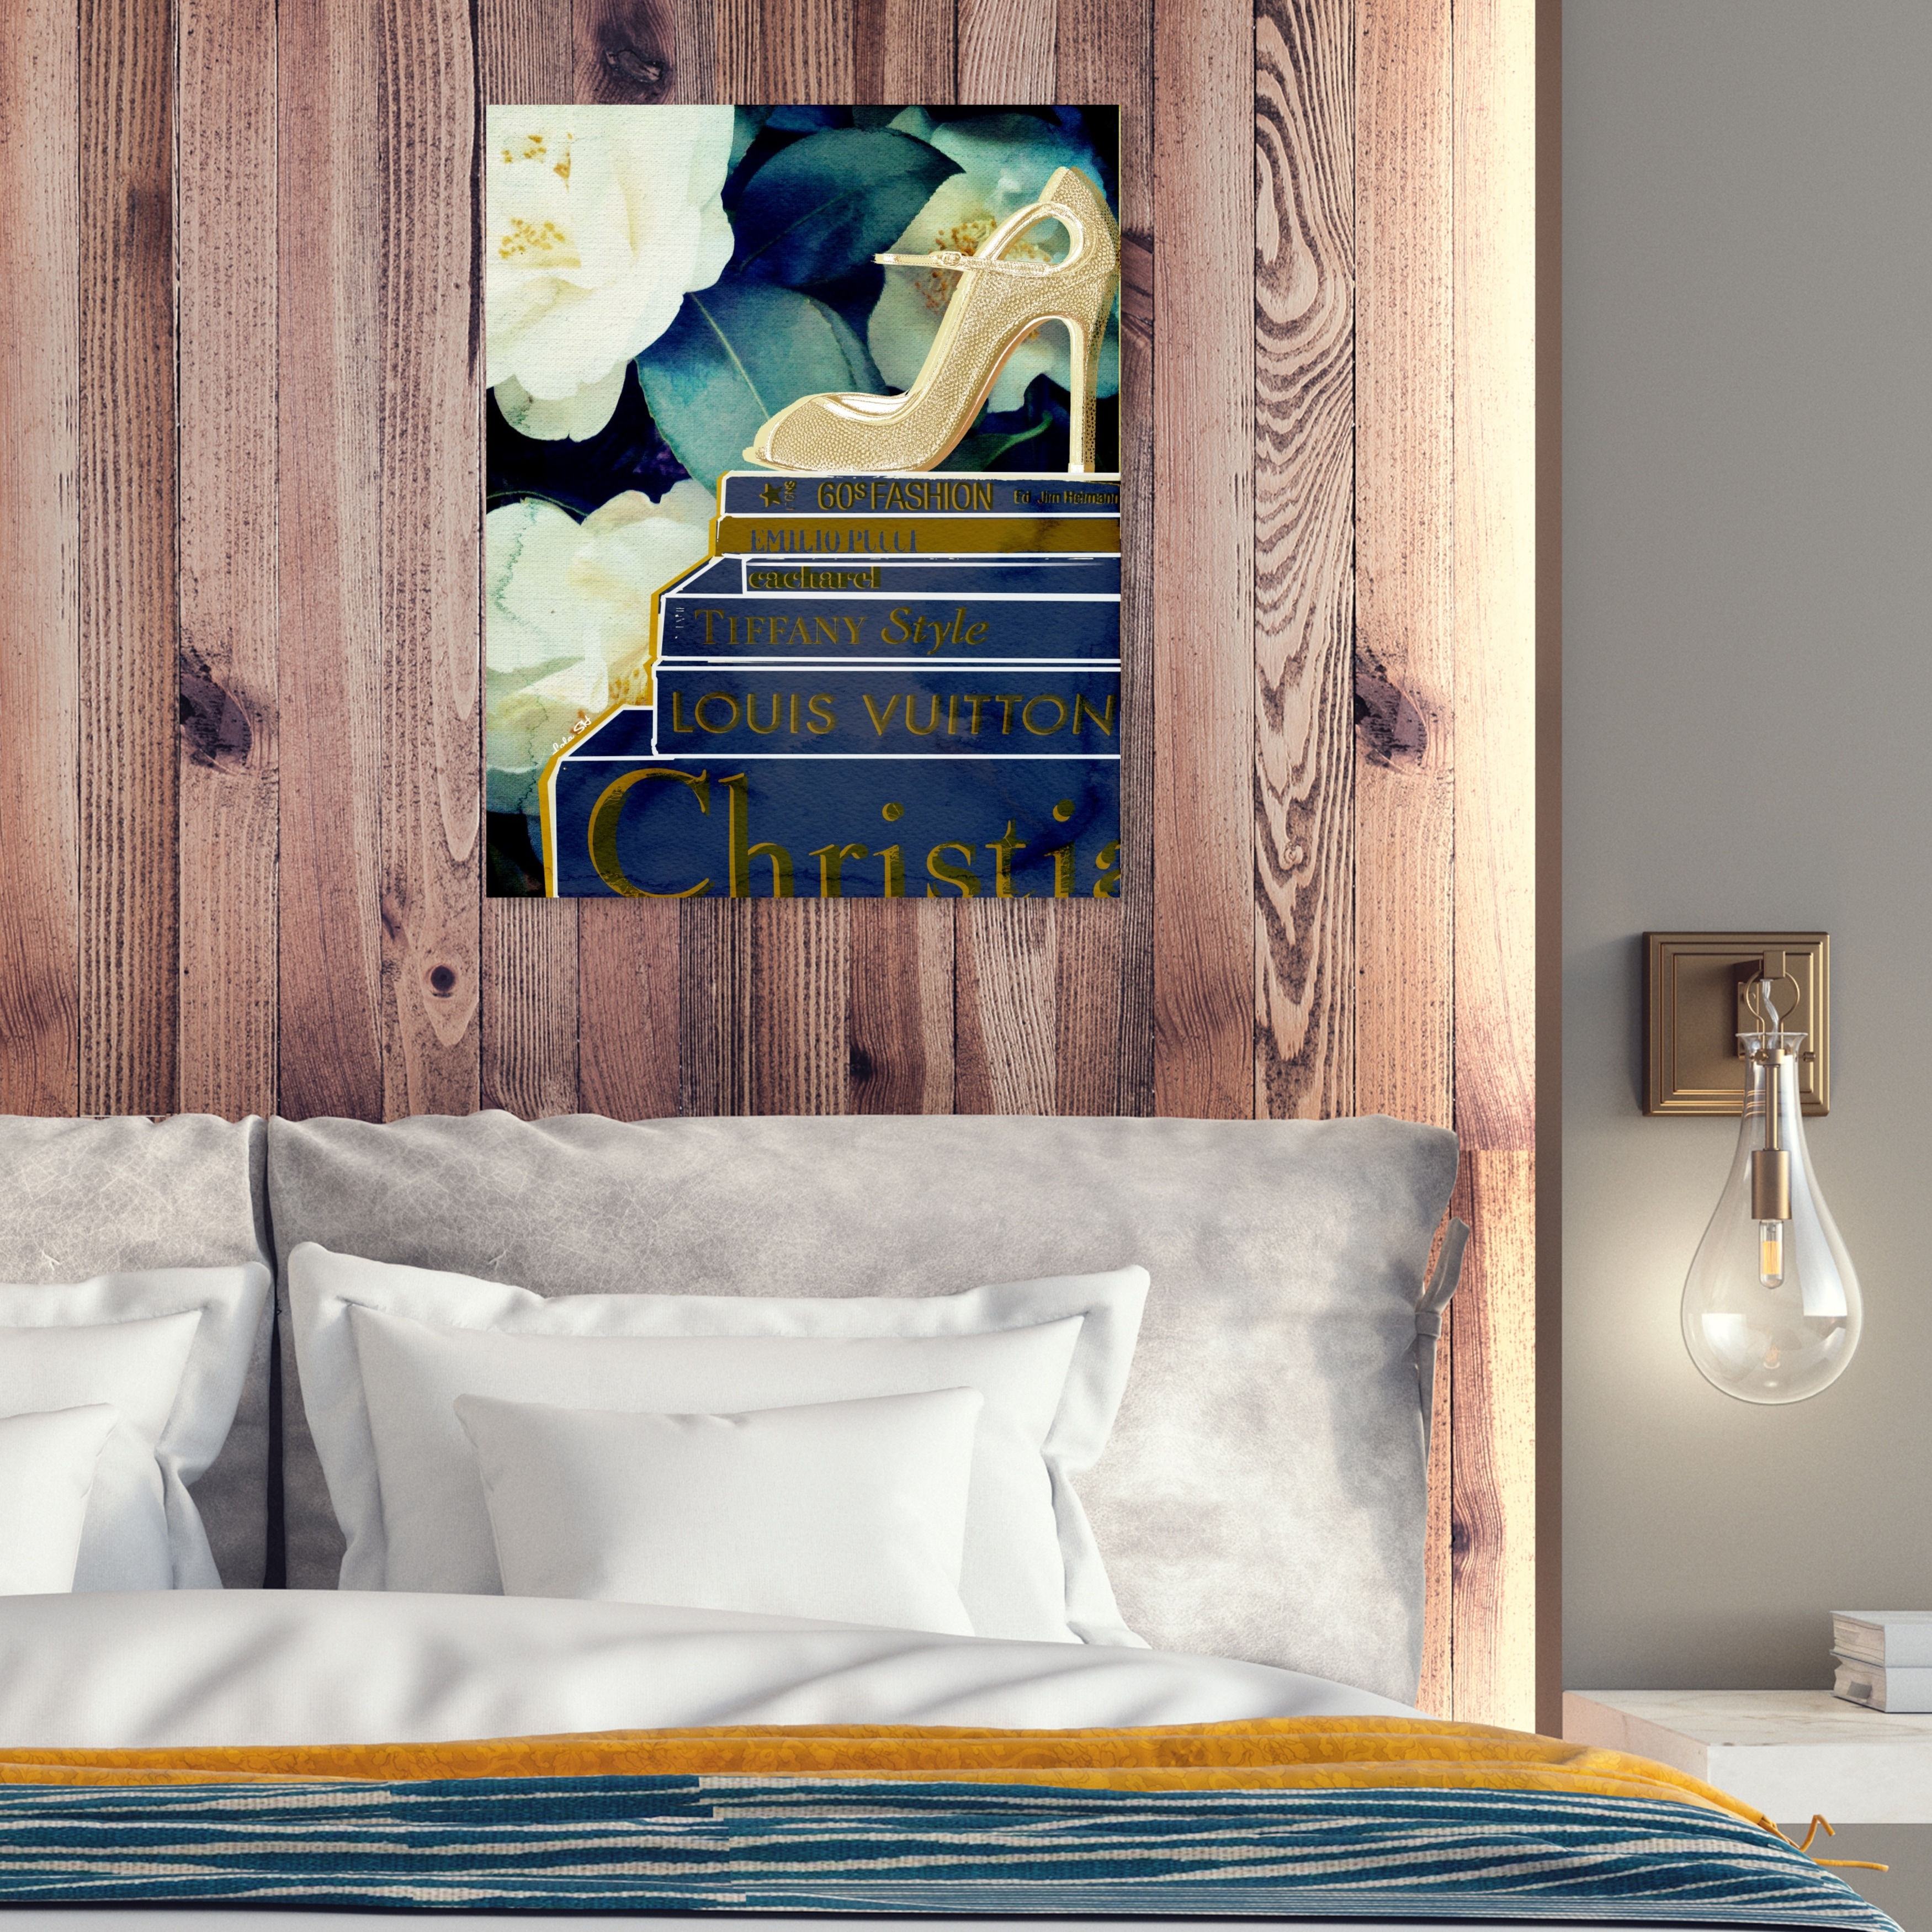 Oliver Gal 'What's On My Mind Blue' Fashion Blue Wall Art Canvas